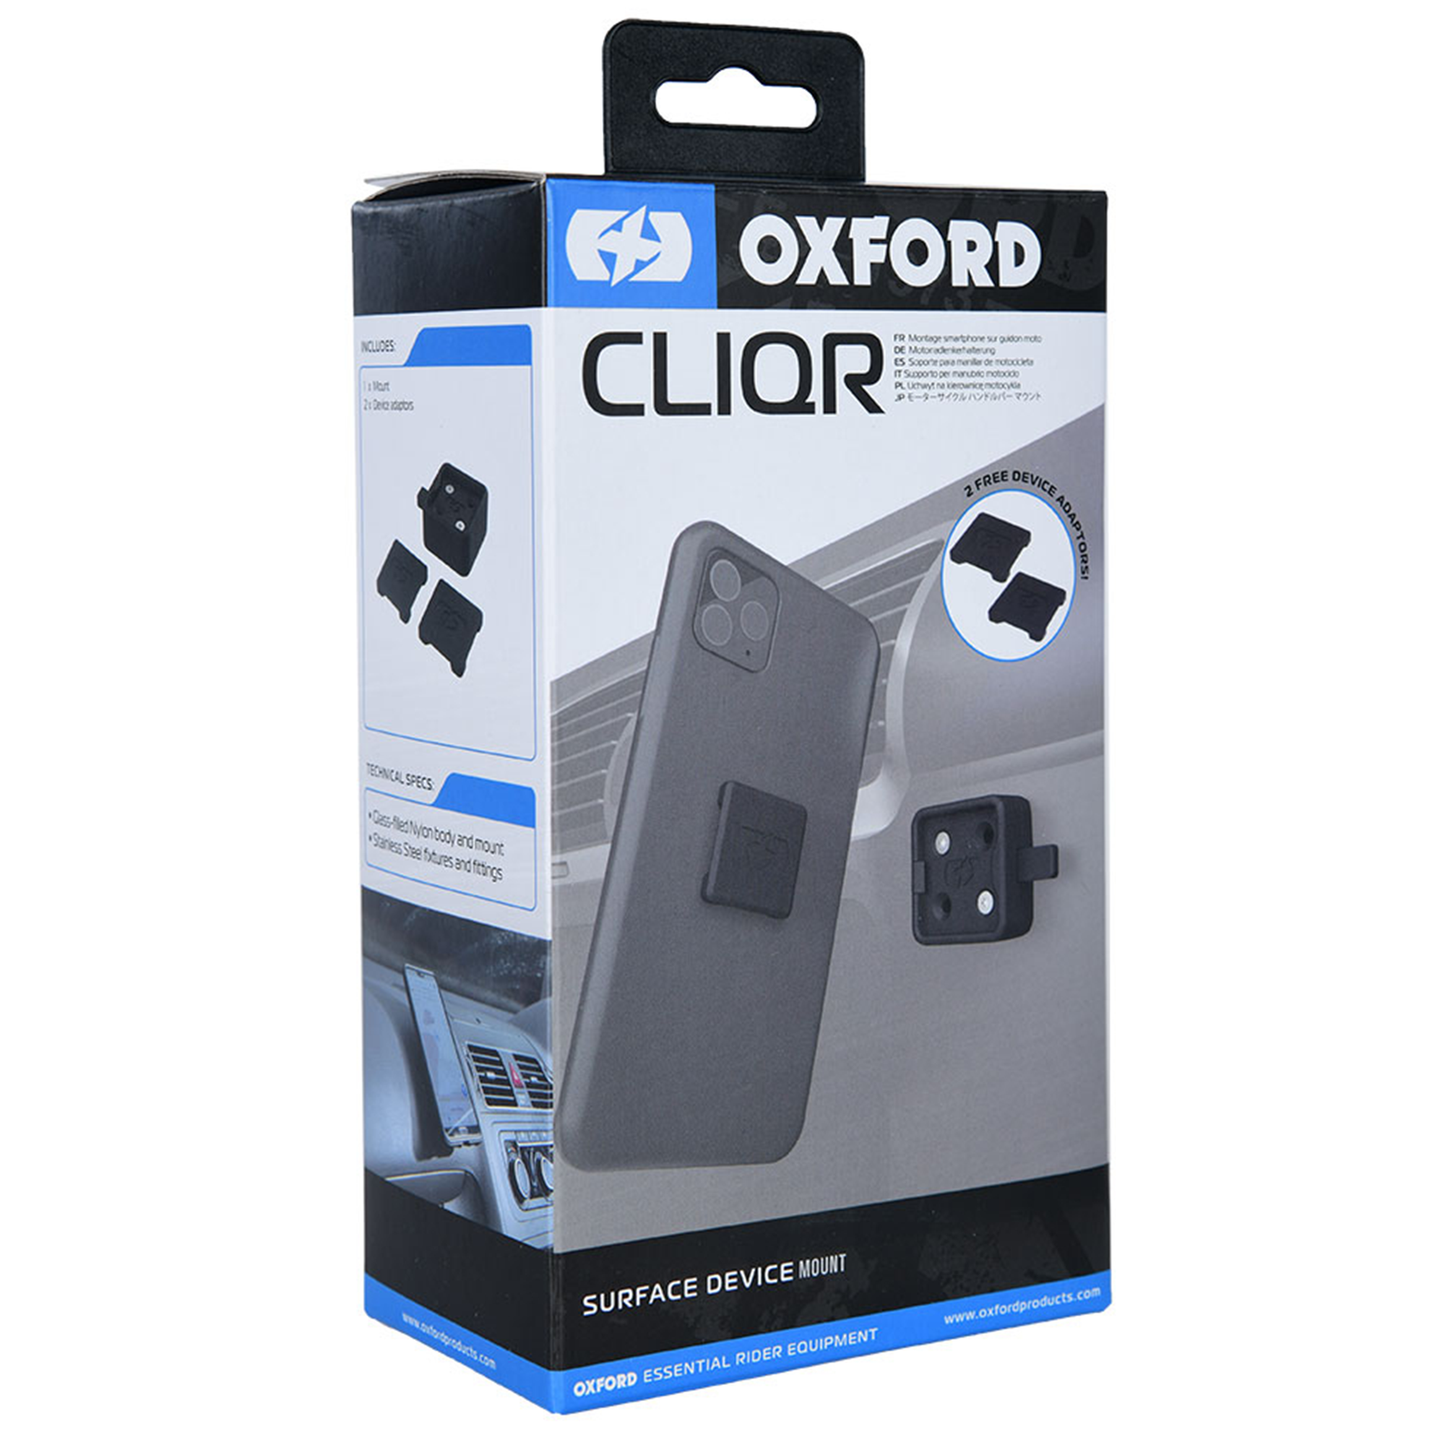 Oxford CLIQR Surface Device Mount